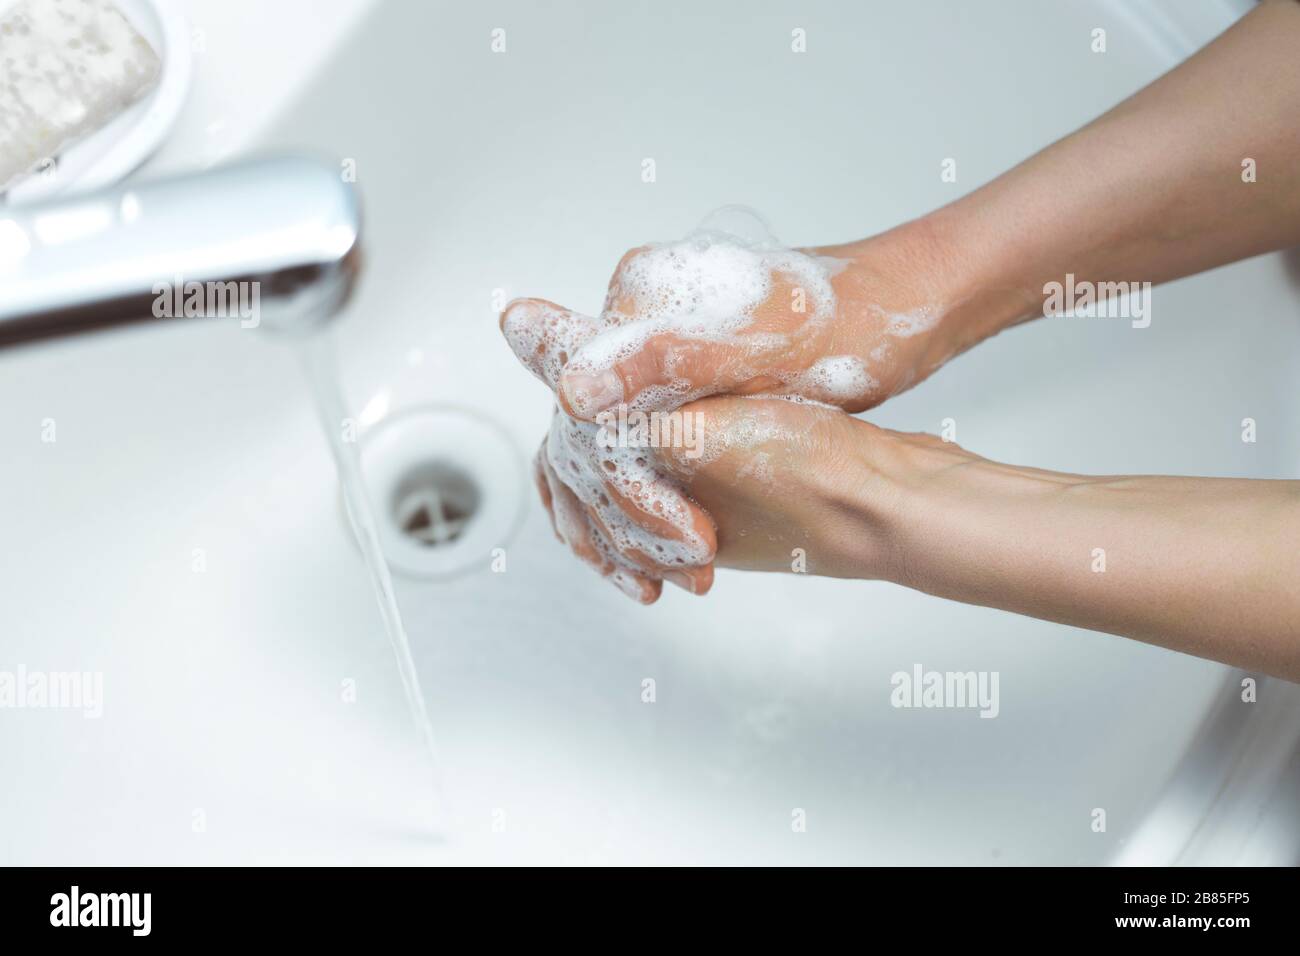 Hand washing with soap under water. Stock Photo